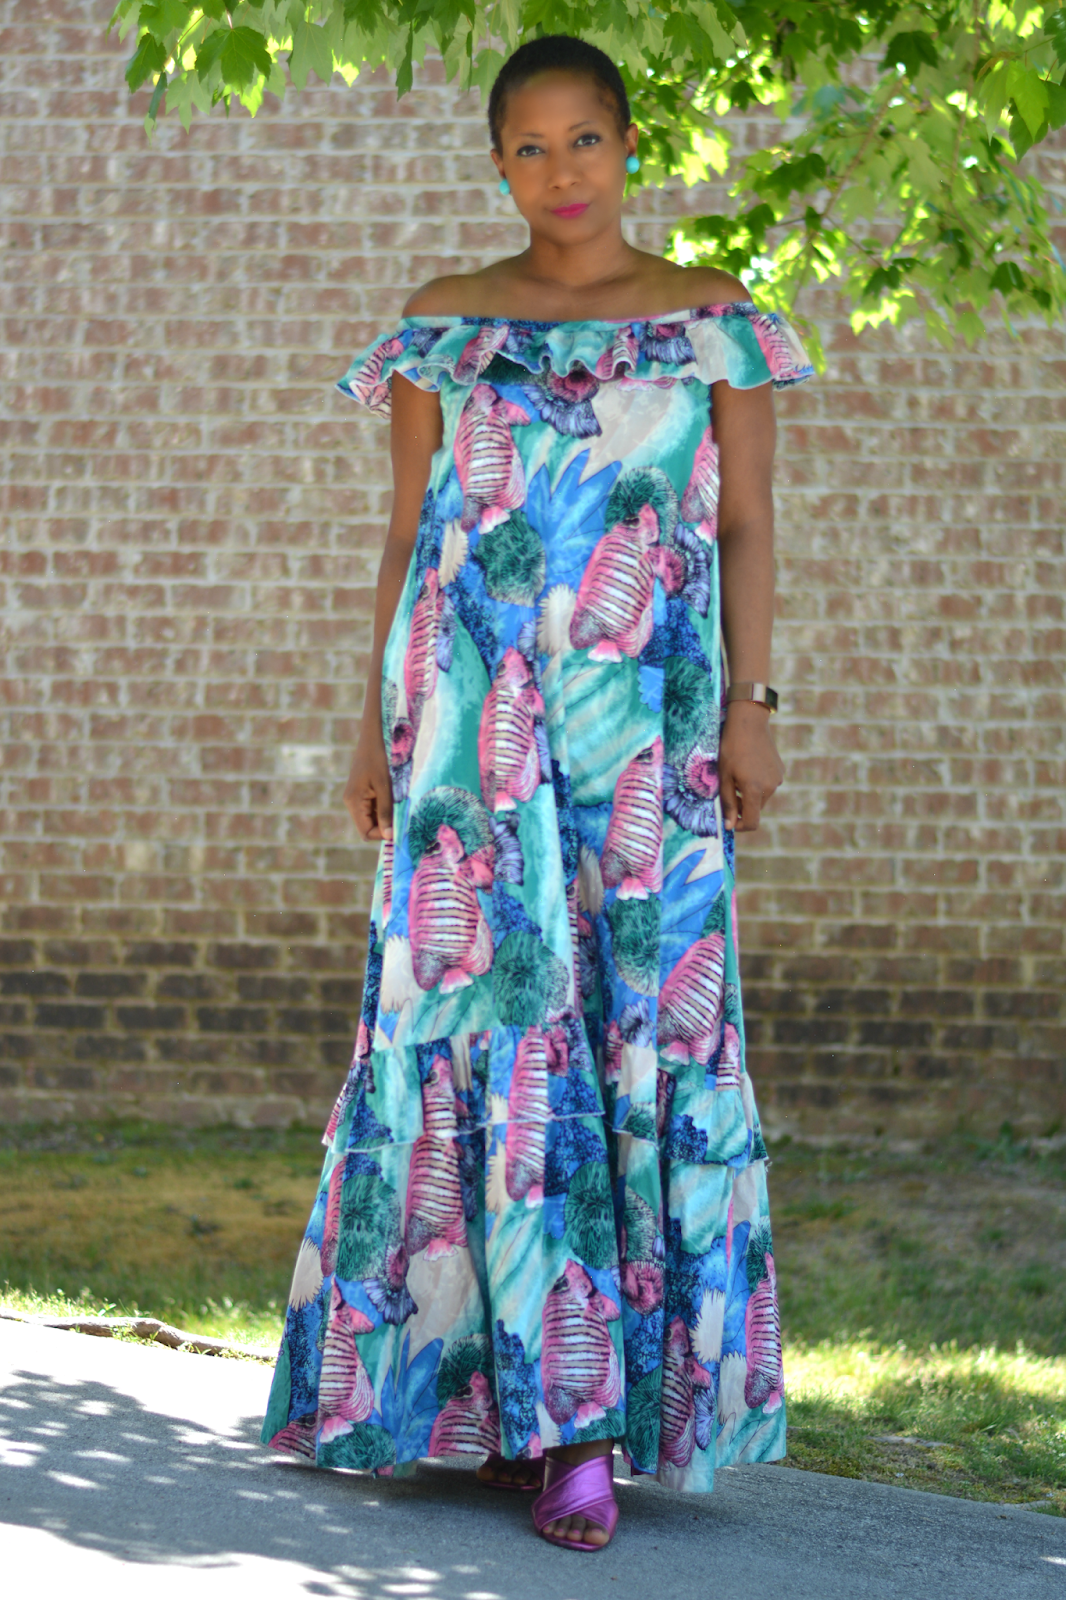 Refashion and downsizing of a vintage thrift store muumuu to a chic summer off the shoulder maxi dress.